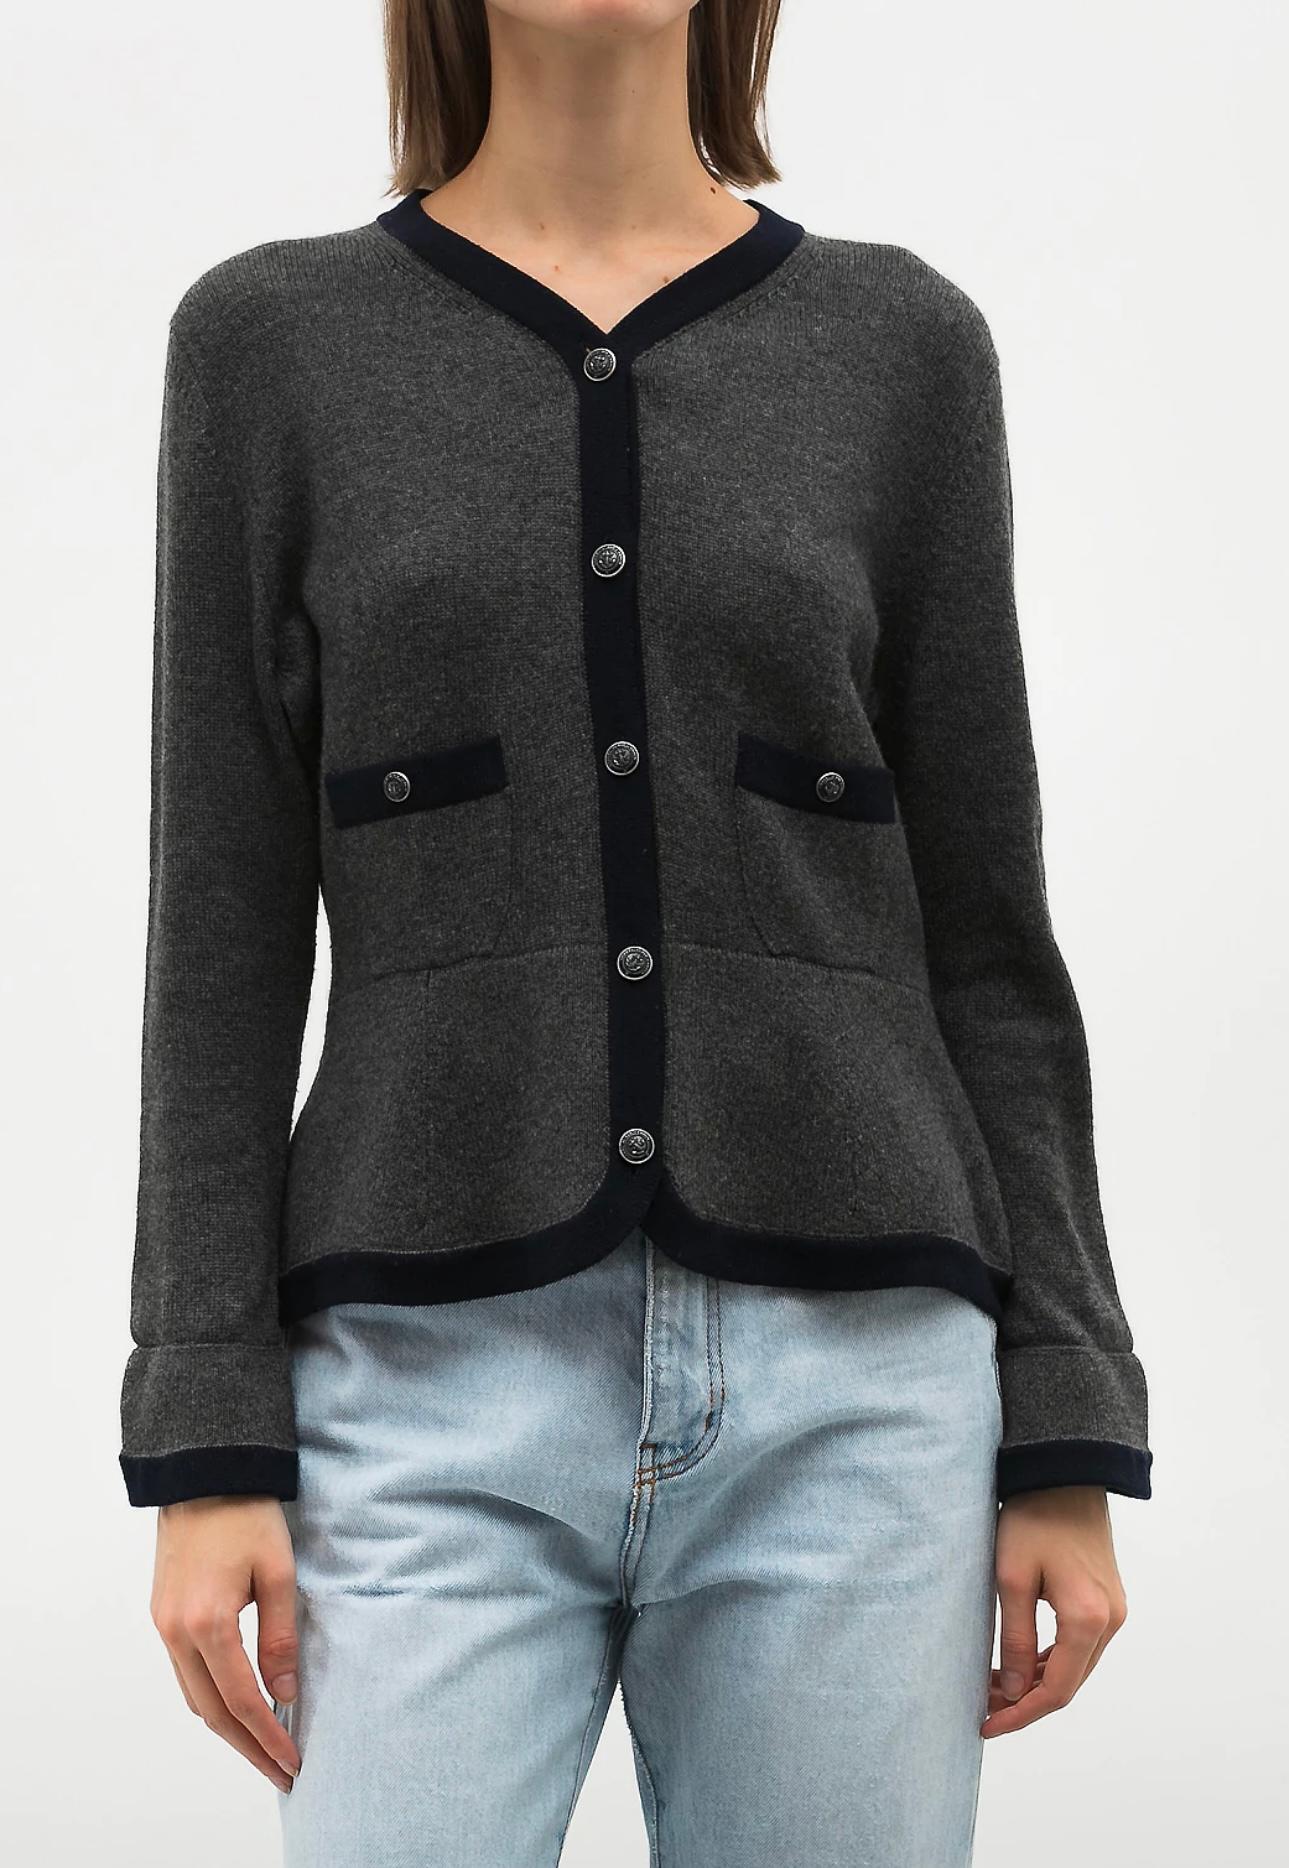 Chanel Iconic Sophie Coppola Style Cashmere Jacket For Sale 4